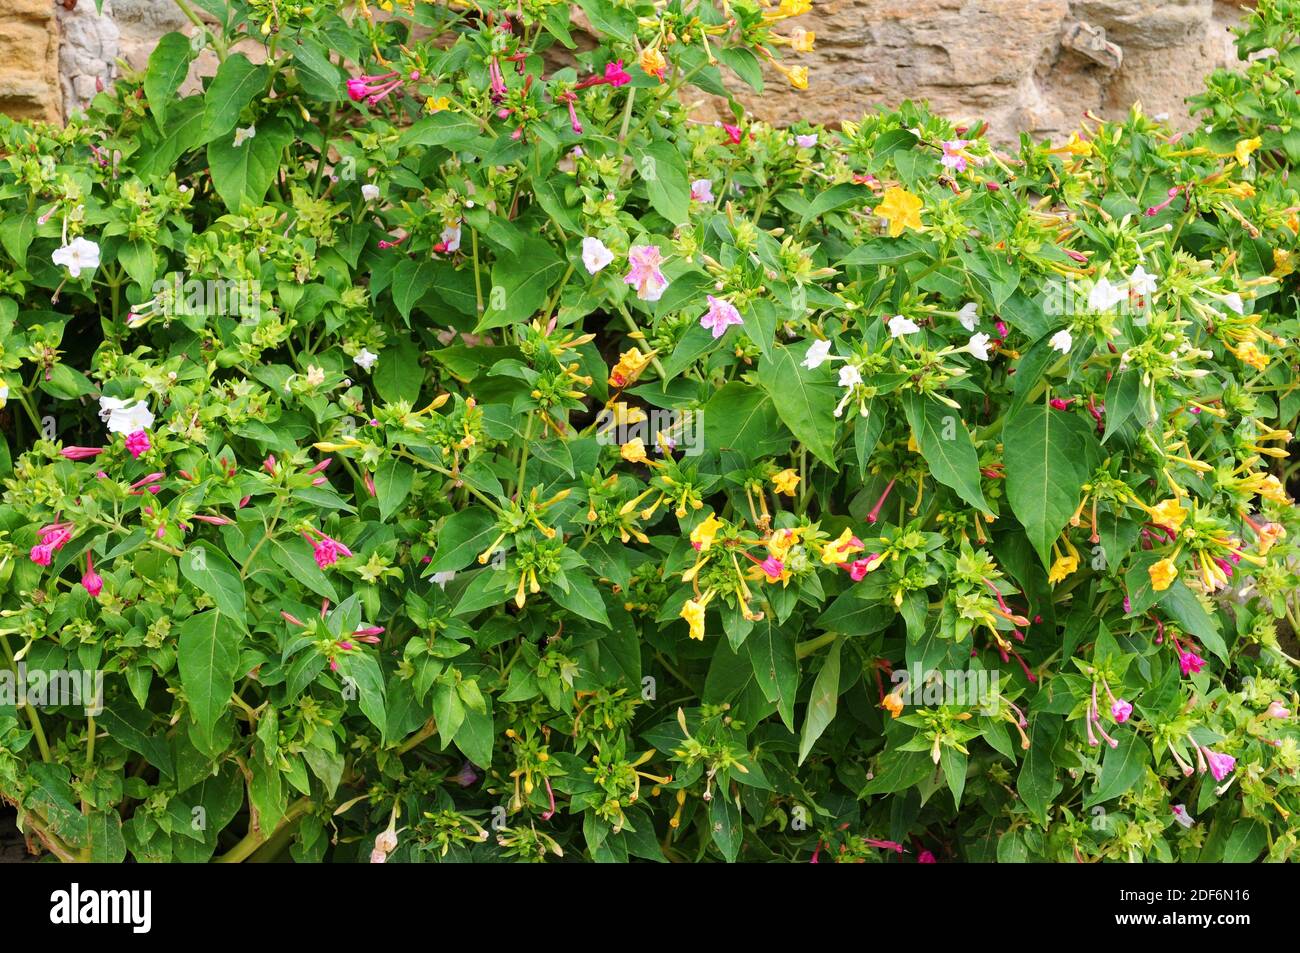 Marvel of Peru or four o'clock flower (Mirabilis jalapa) is a perennial plant with variegated flowers native to tropical South America. Stock Photo